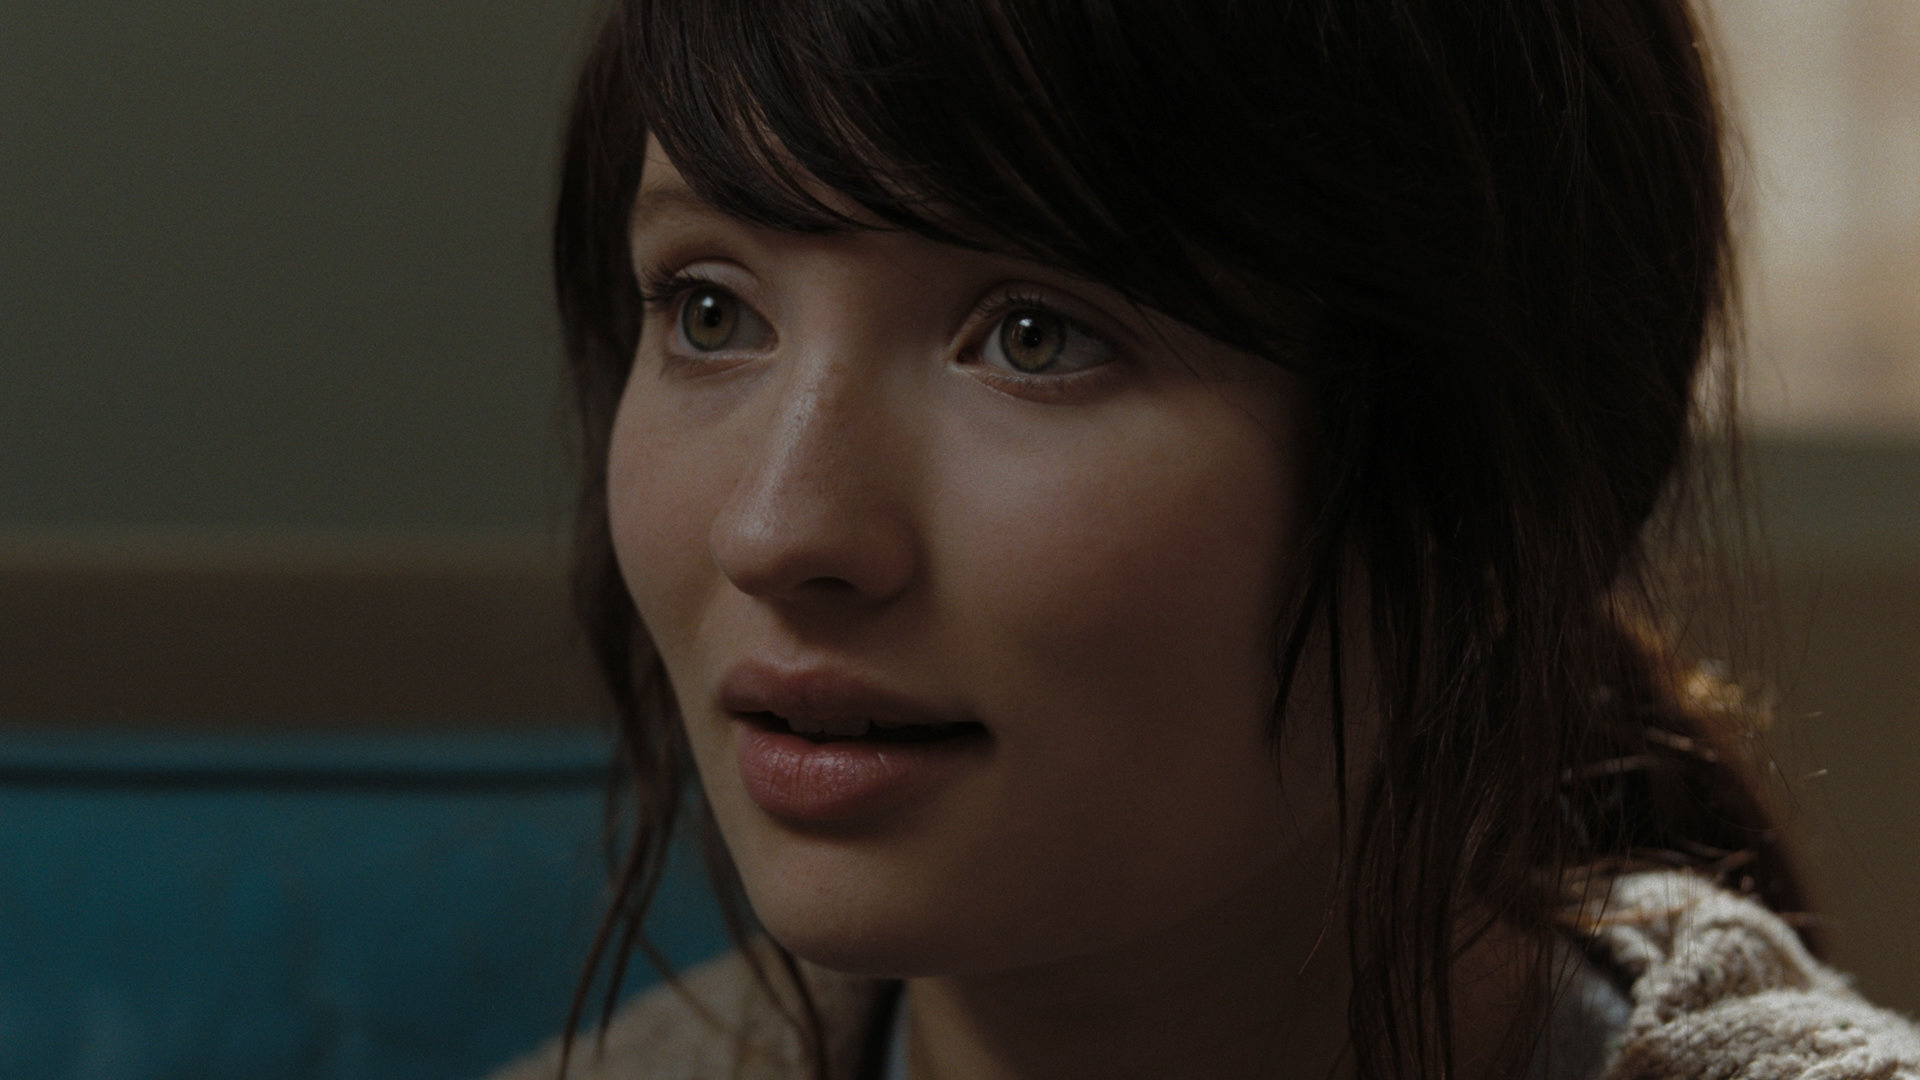 Emily Browning wallpapers, Full HD resolution, Desktop backgrounds, High-quality images, 1920x1080 Full HD Desktop